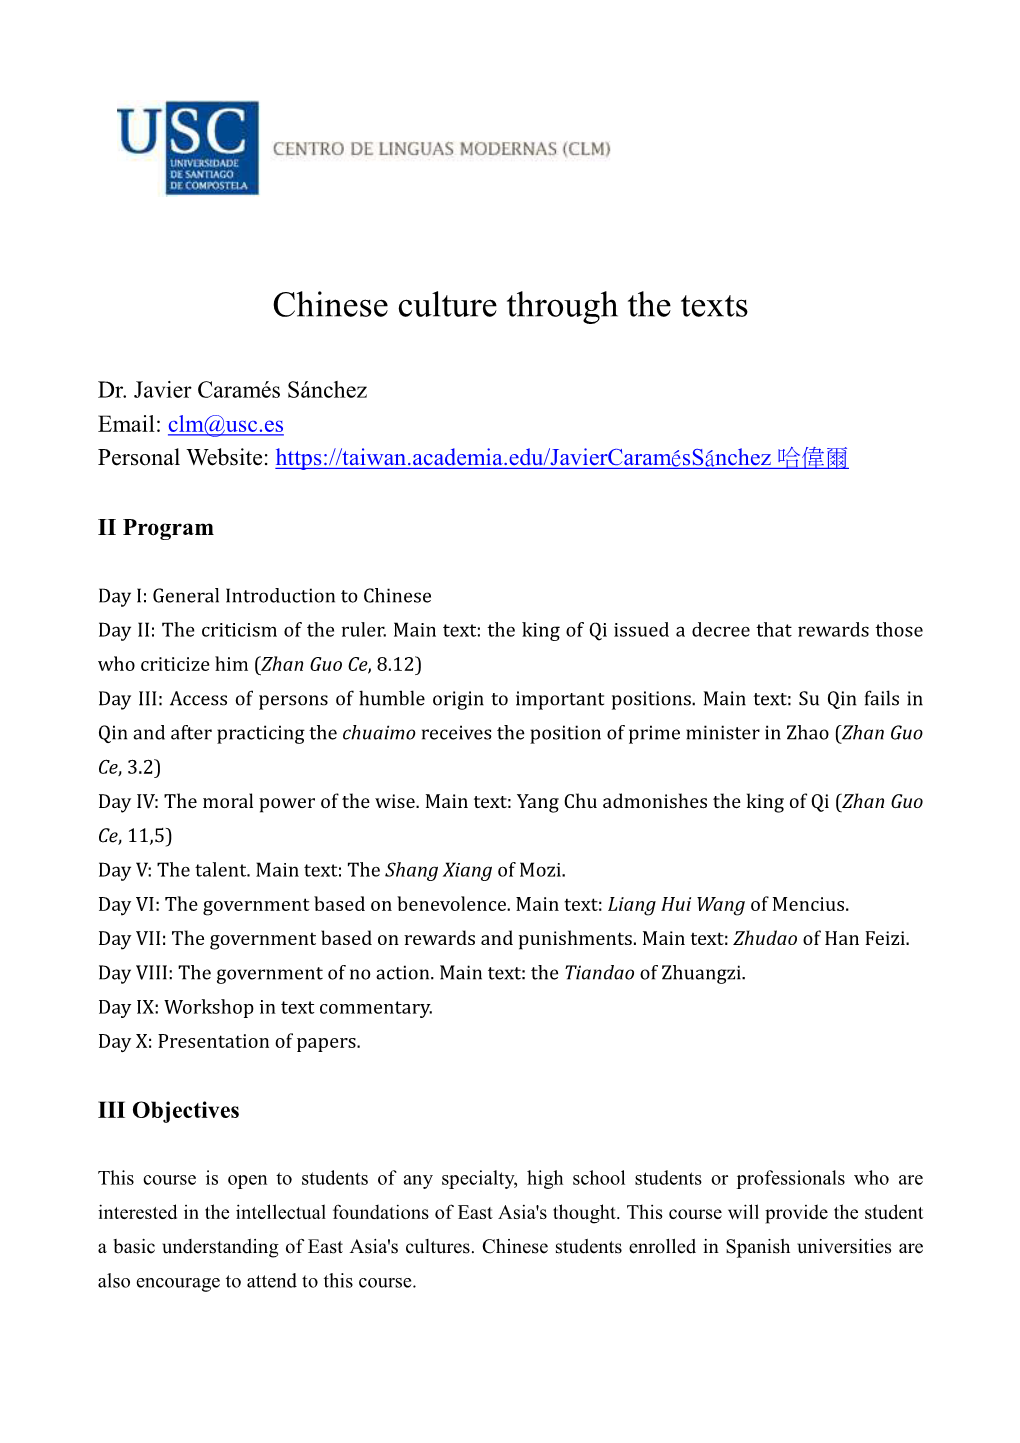 Chinese Culture Through the Texts